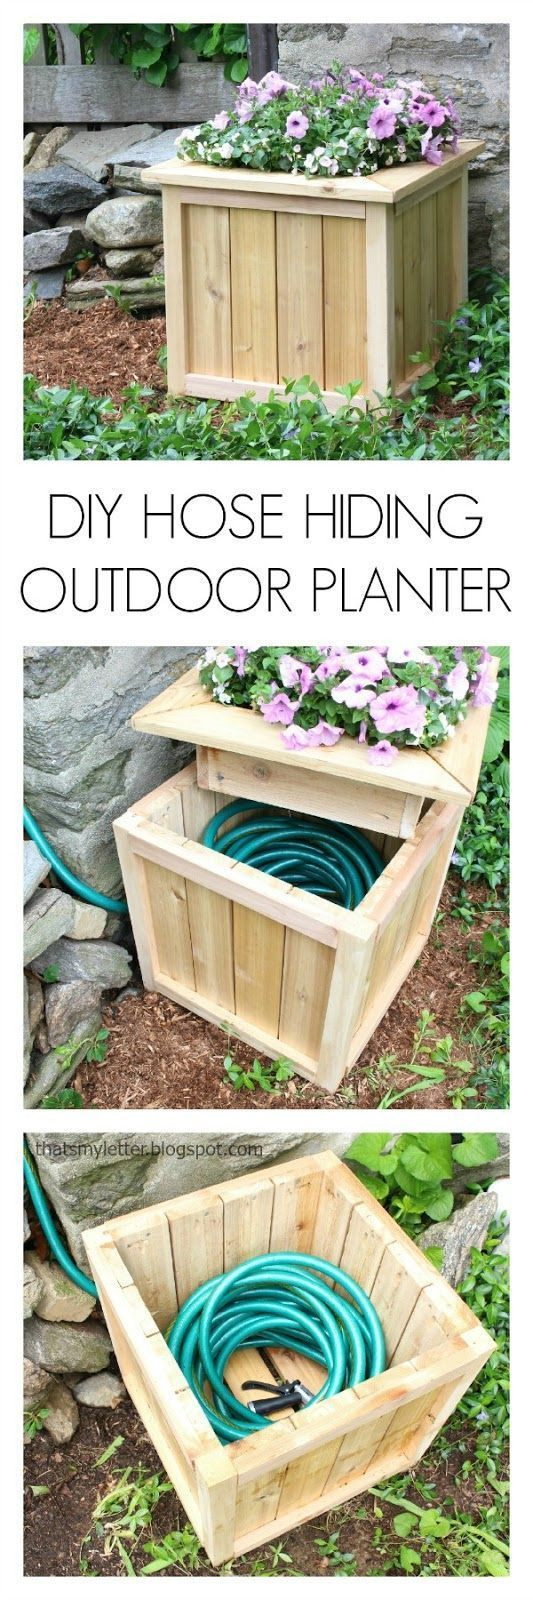 DIY Pallet Planter Box
 30 Creative DIY Wood and Pallet Planter Boxes To Style Up